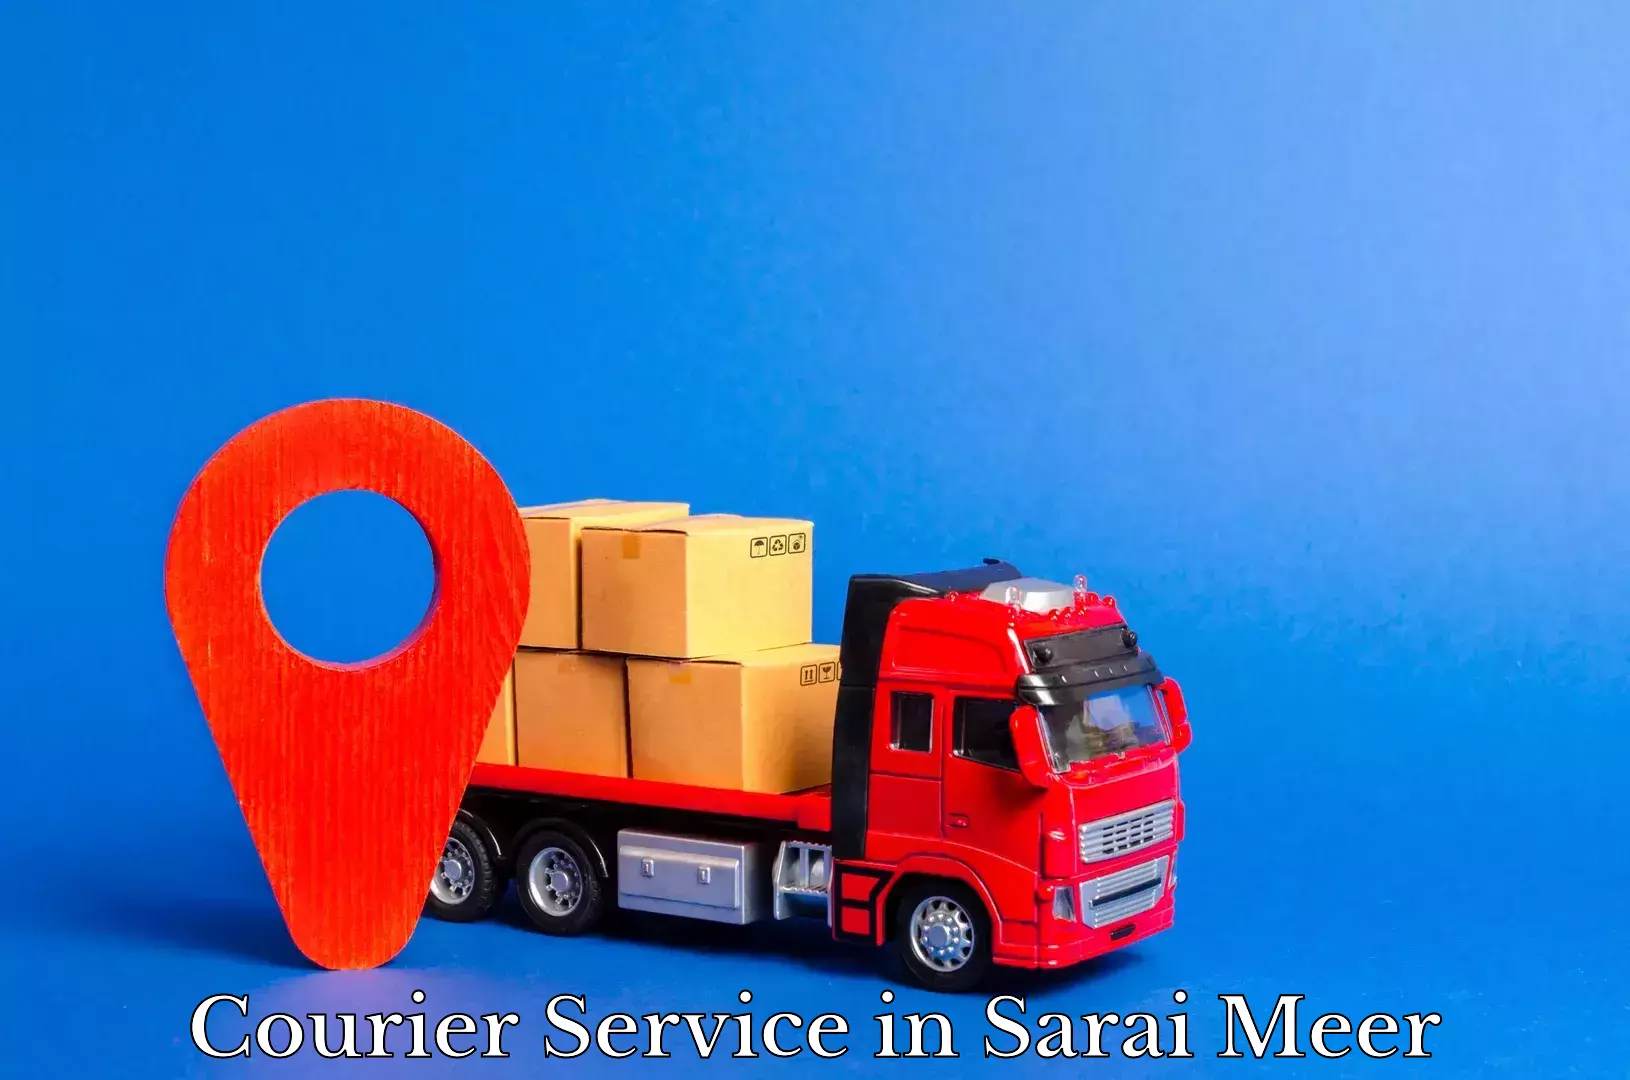 On-call courier service in Sarai Meer